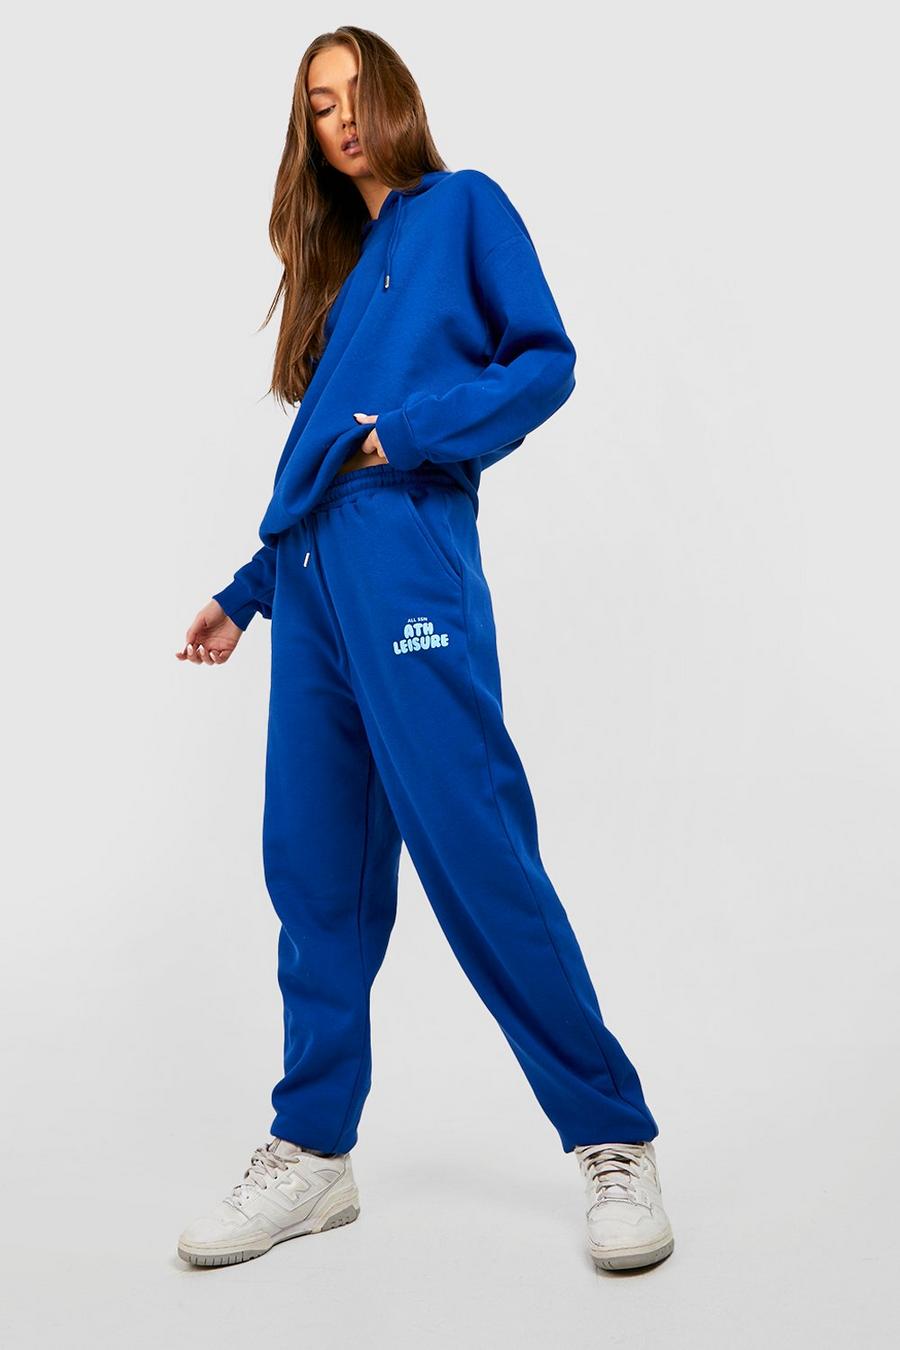 Cobalt blue Ath Leisure Puff Print Hooded Tracksuit